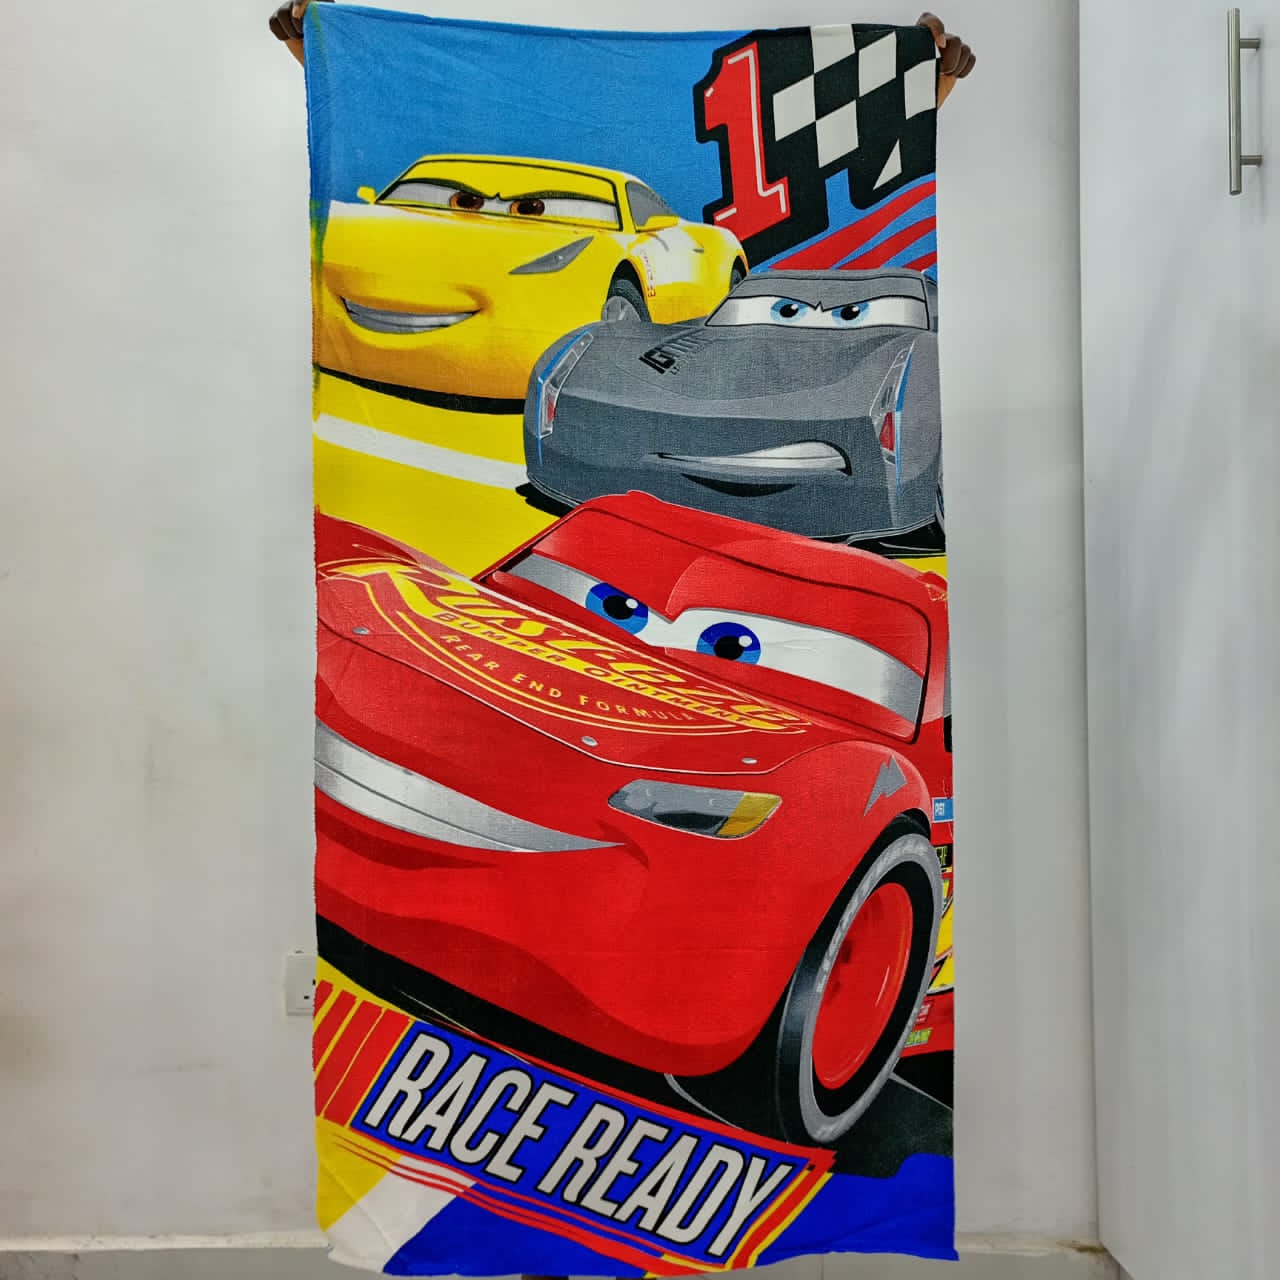 RACE READY KIDS LARGE TOWEL 28/55 INCHES